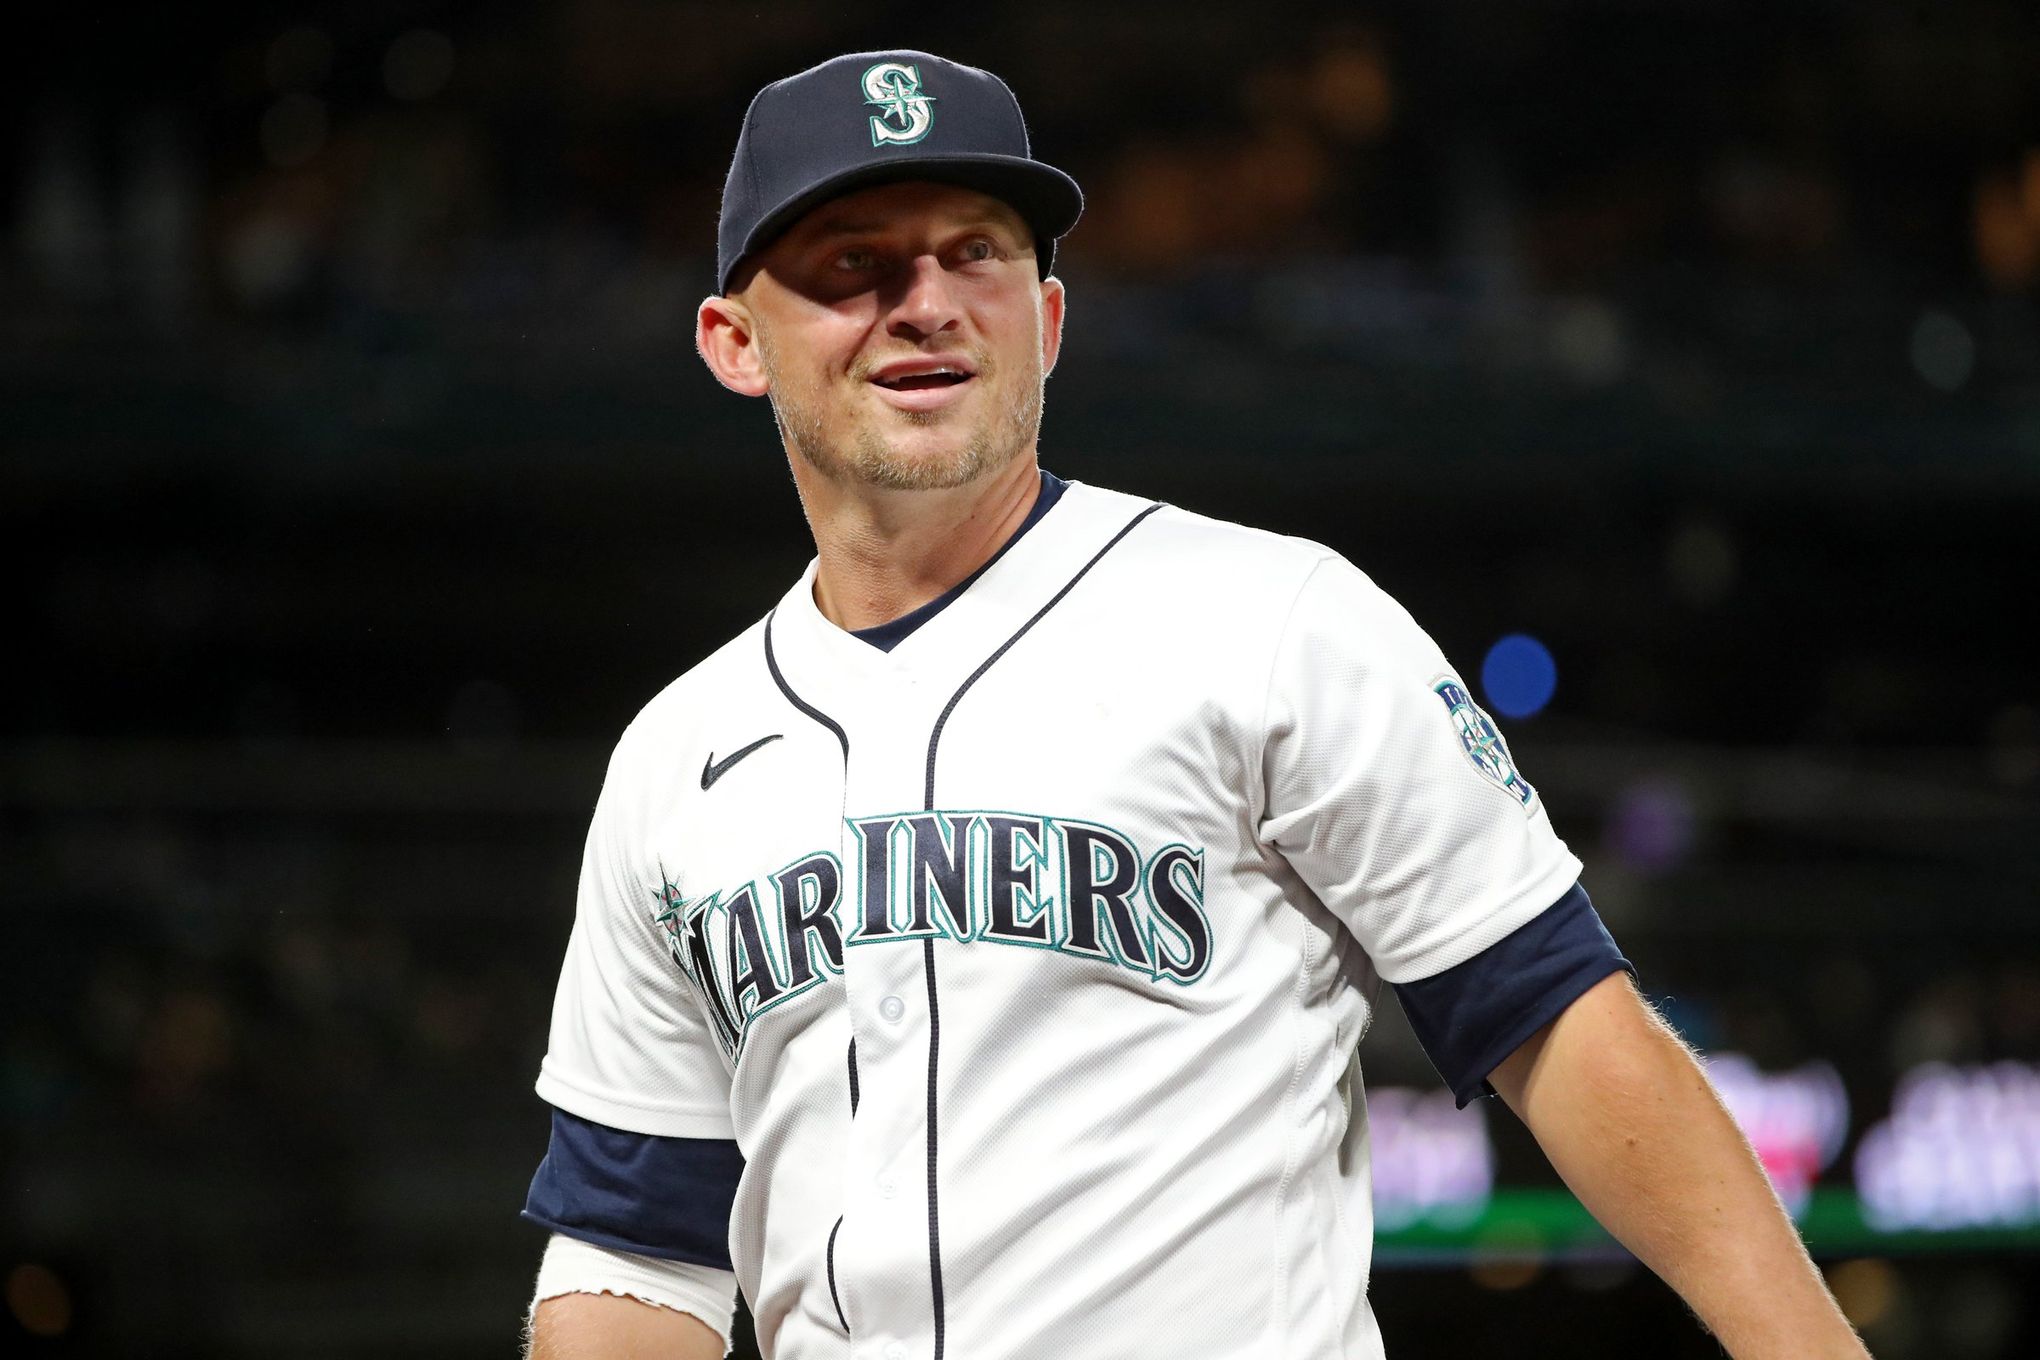 With everything on the line, is this the end for Kyle Seager and the